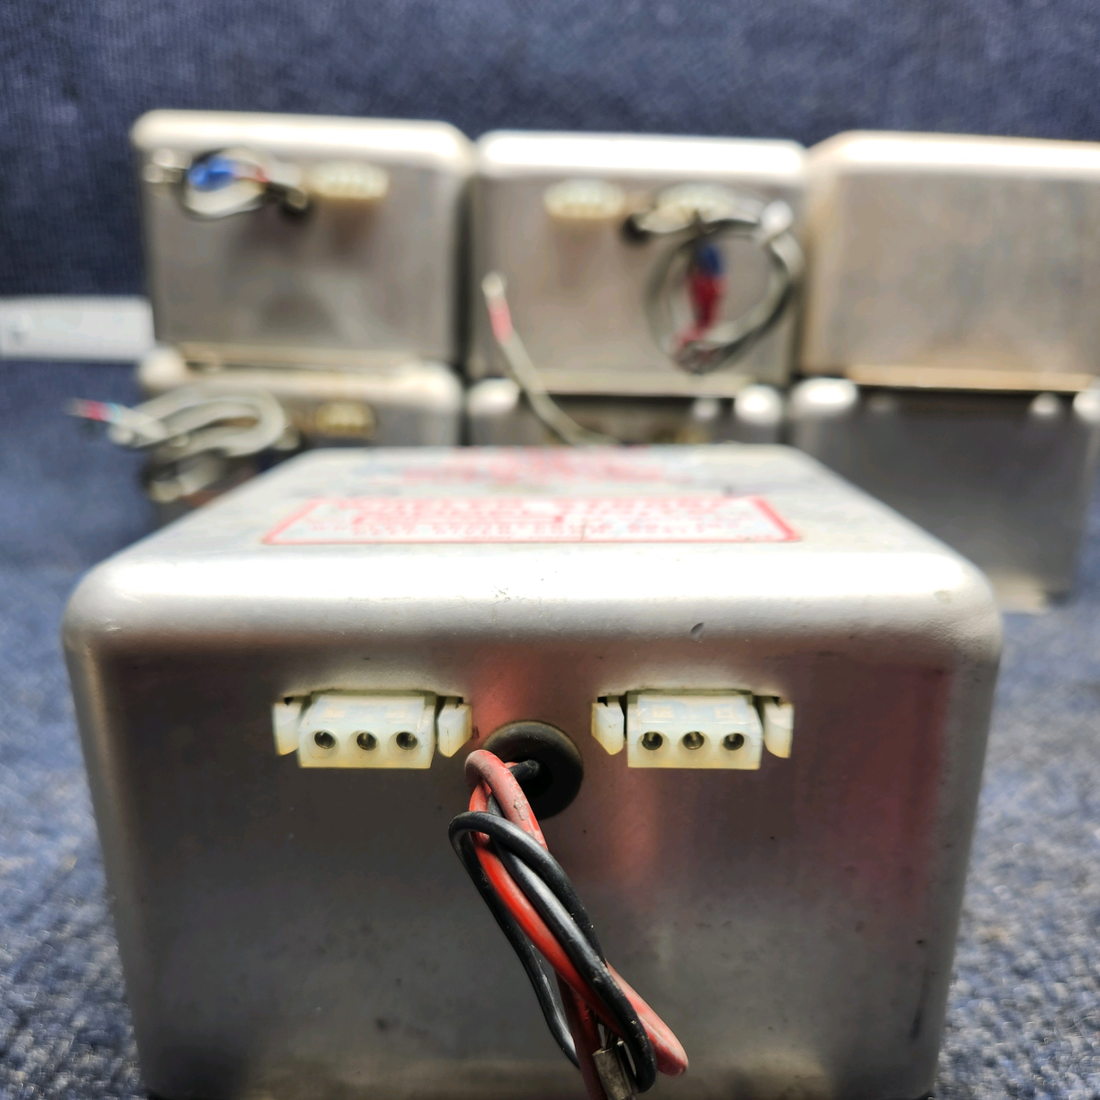 Used aircraft parts for sale, A413,T2-14 Whelen Strobe Power Supply WHELEN STROBE LIGHT POWER SUPPLY "FOR PARTS ONLY" 14VOLTS